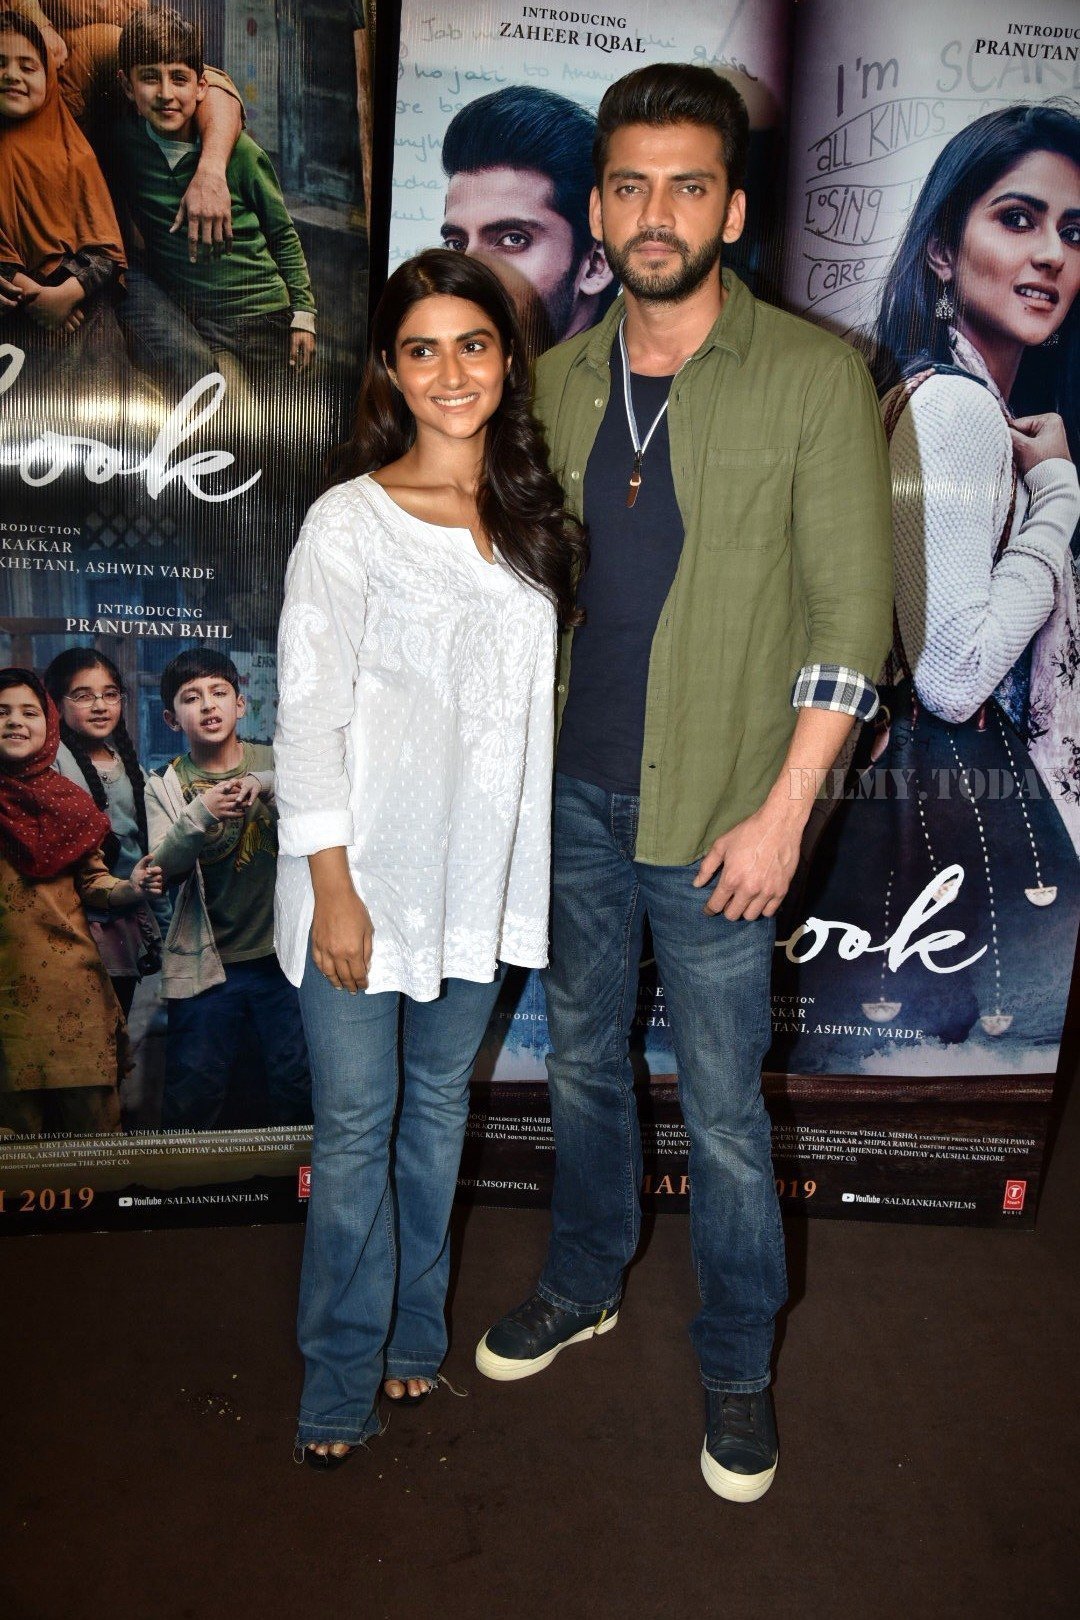 Photos: Trailer Launch Of Notebook at PVR | Picture 1628979